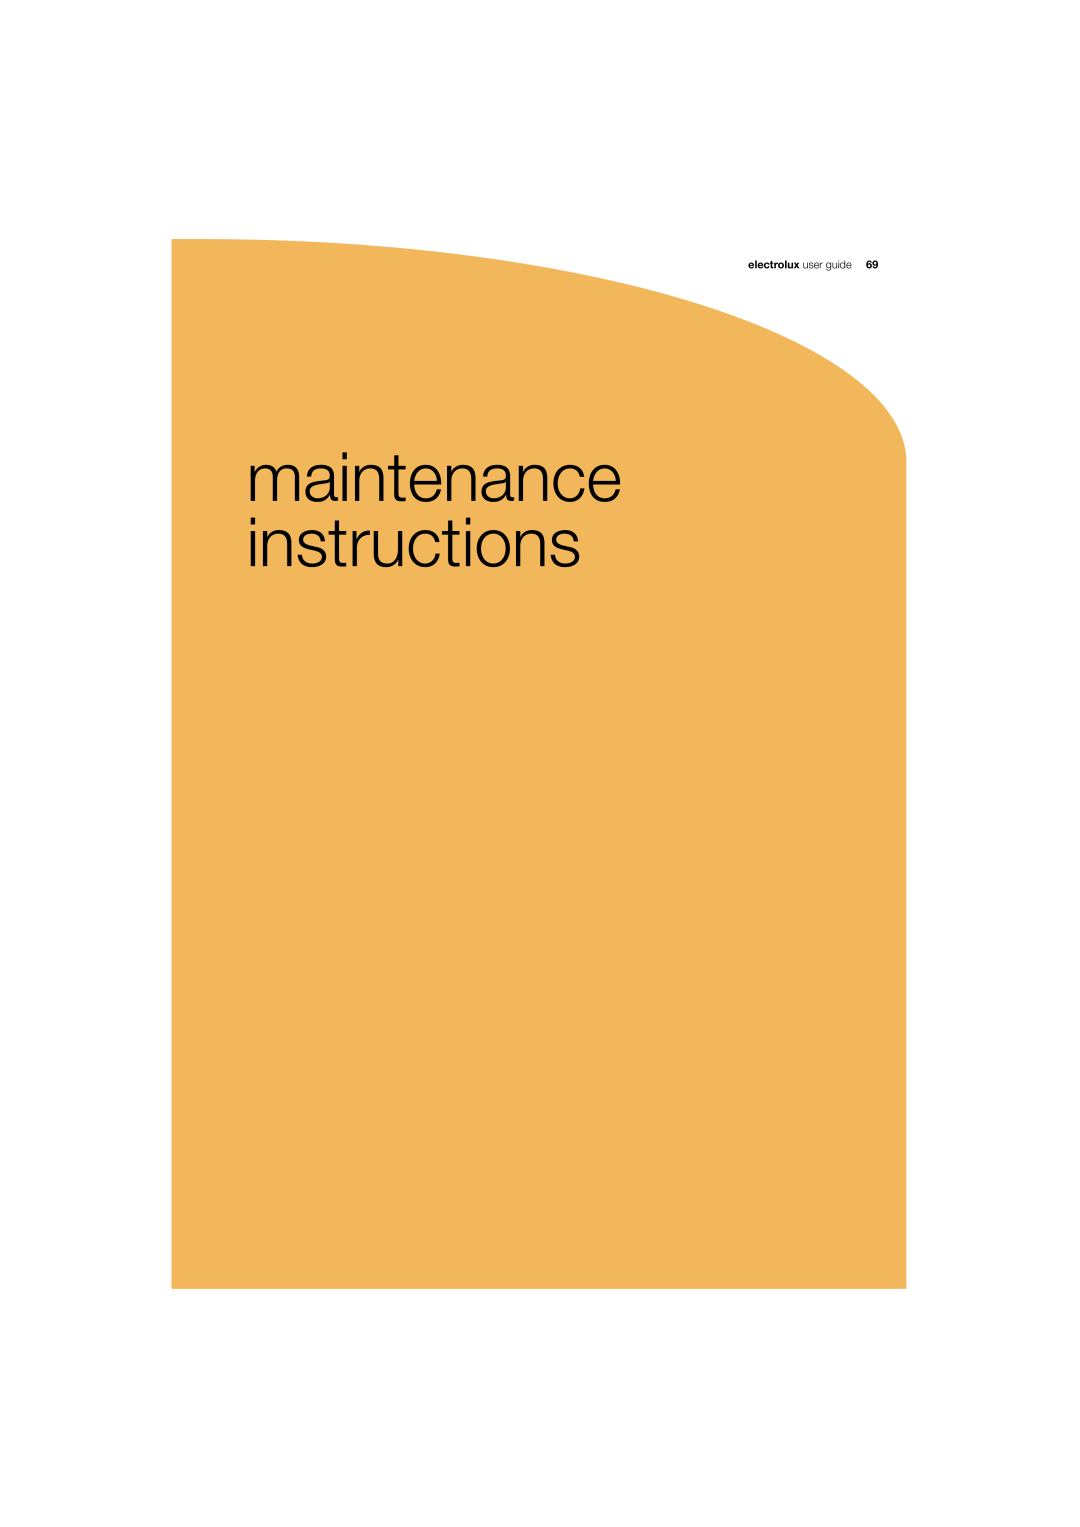 Electrolux 180 manual maintenance instructions, electrolux user guide 